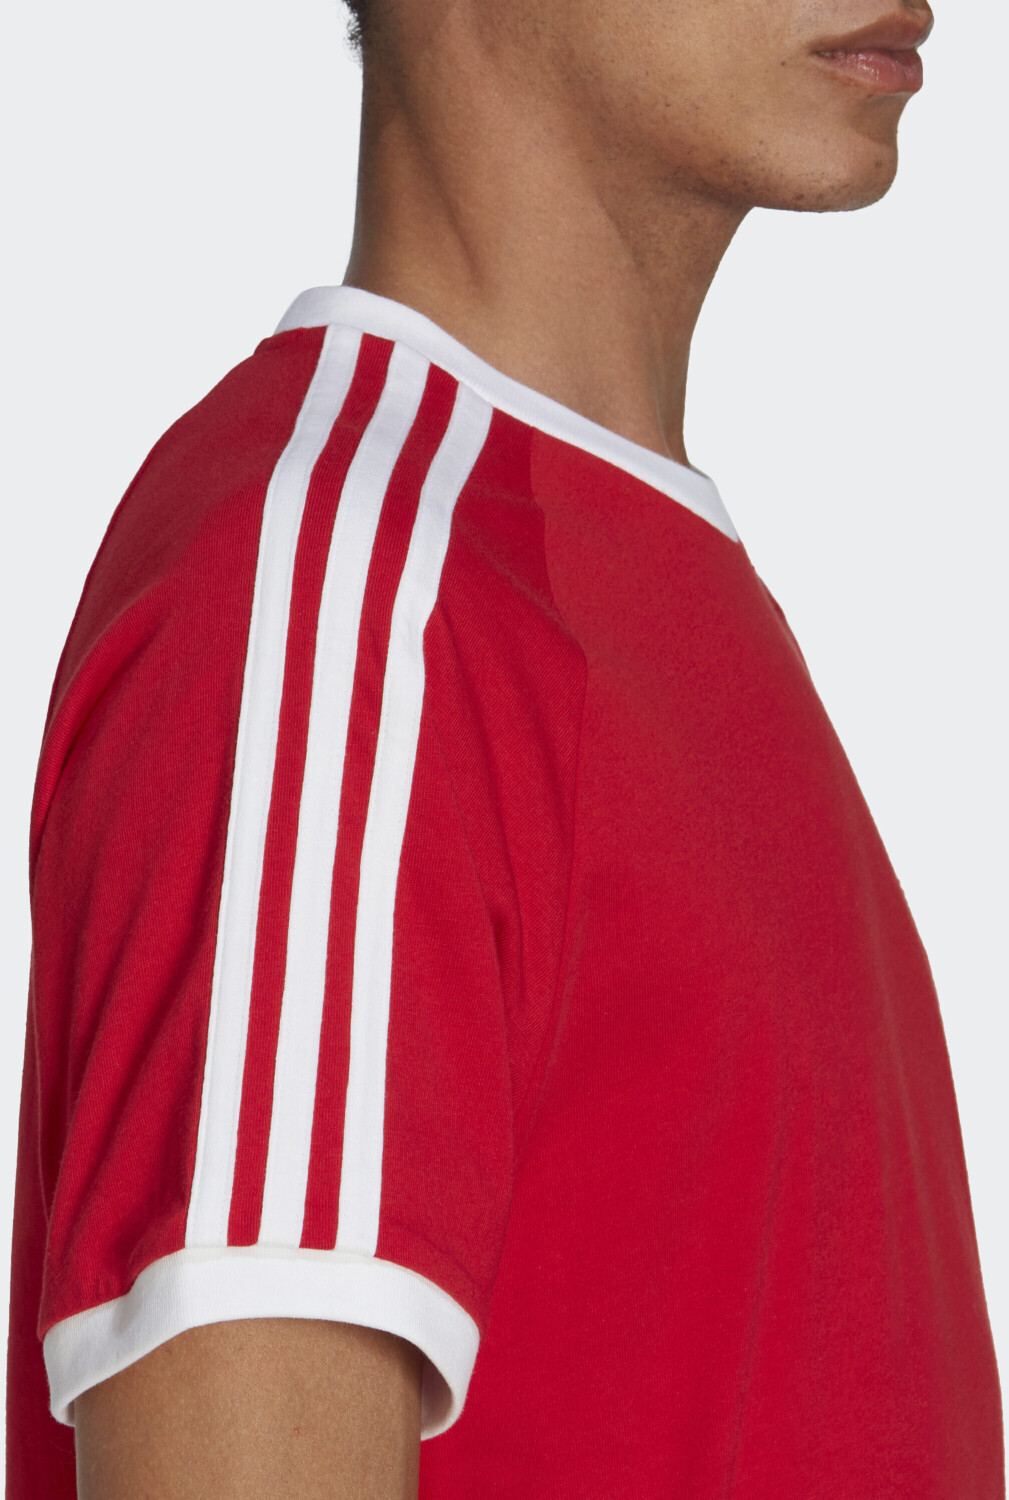 T-Shirt – Classics on better Deals (IA4852) Adicolor £27.99 from Best (Today) Adidas 3-Stripes Buy scarlet